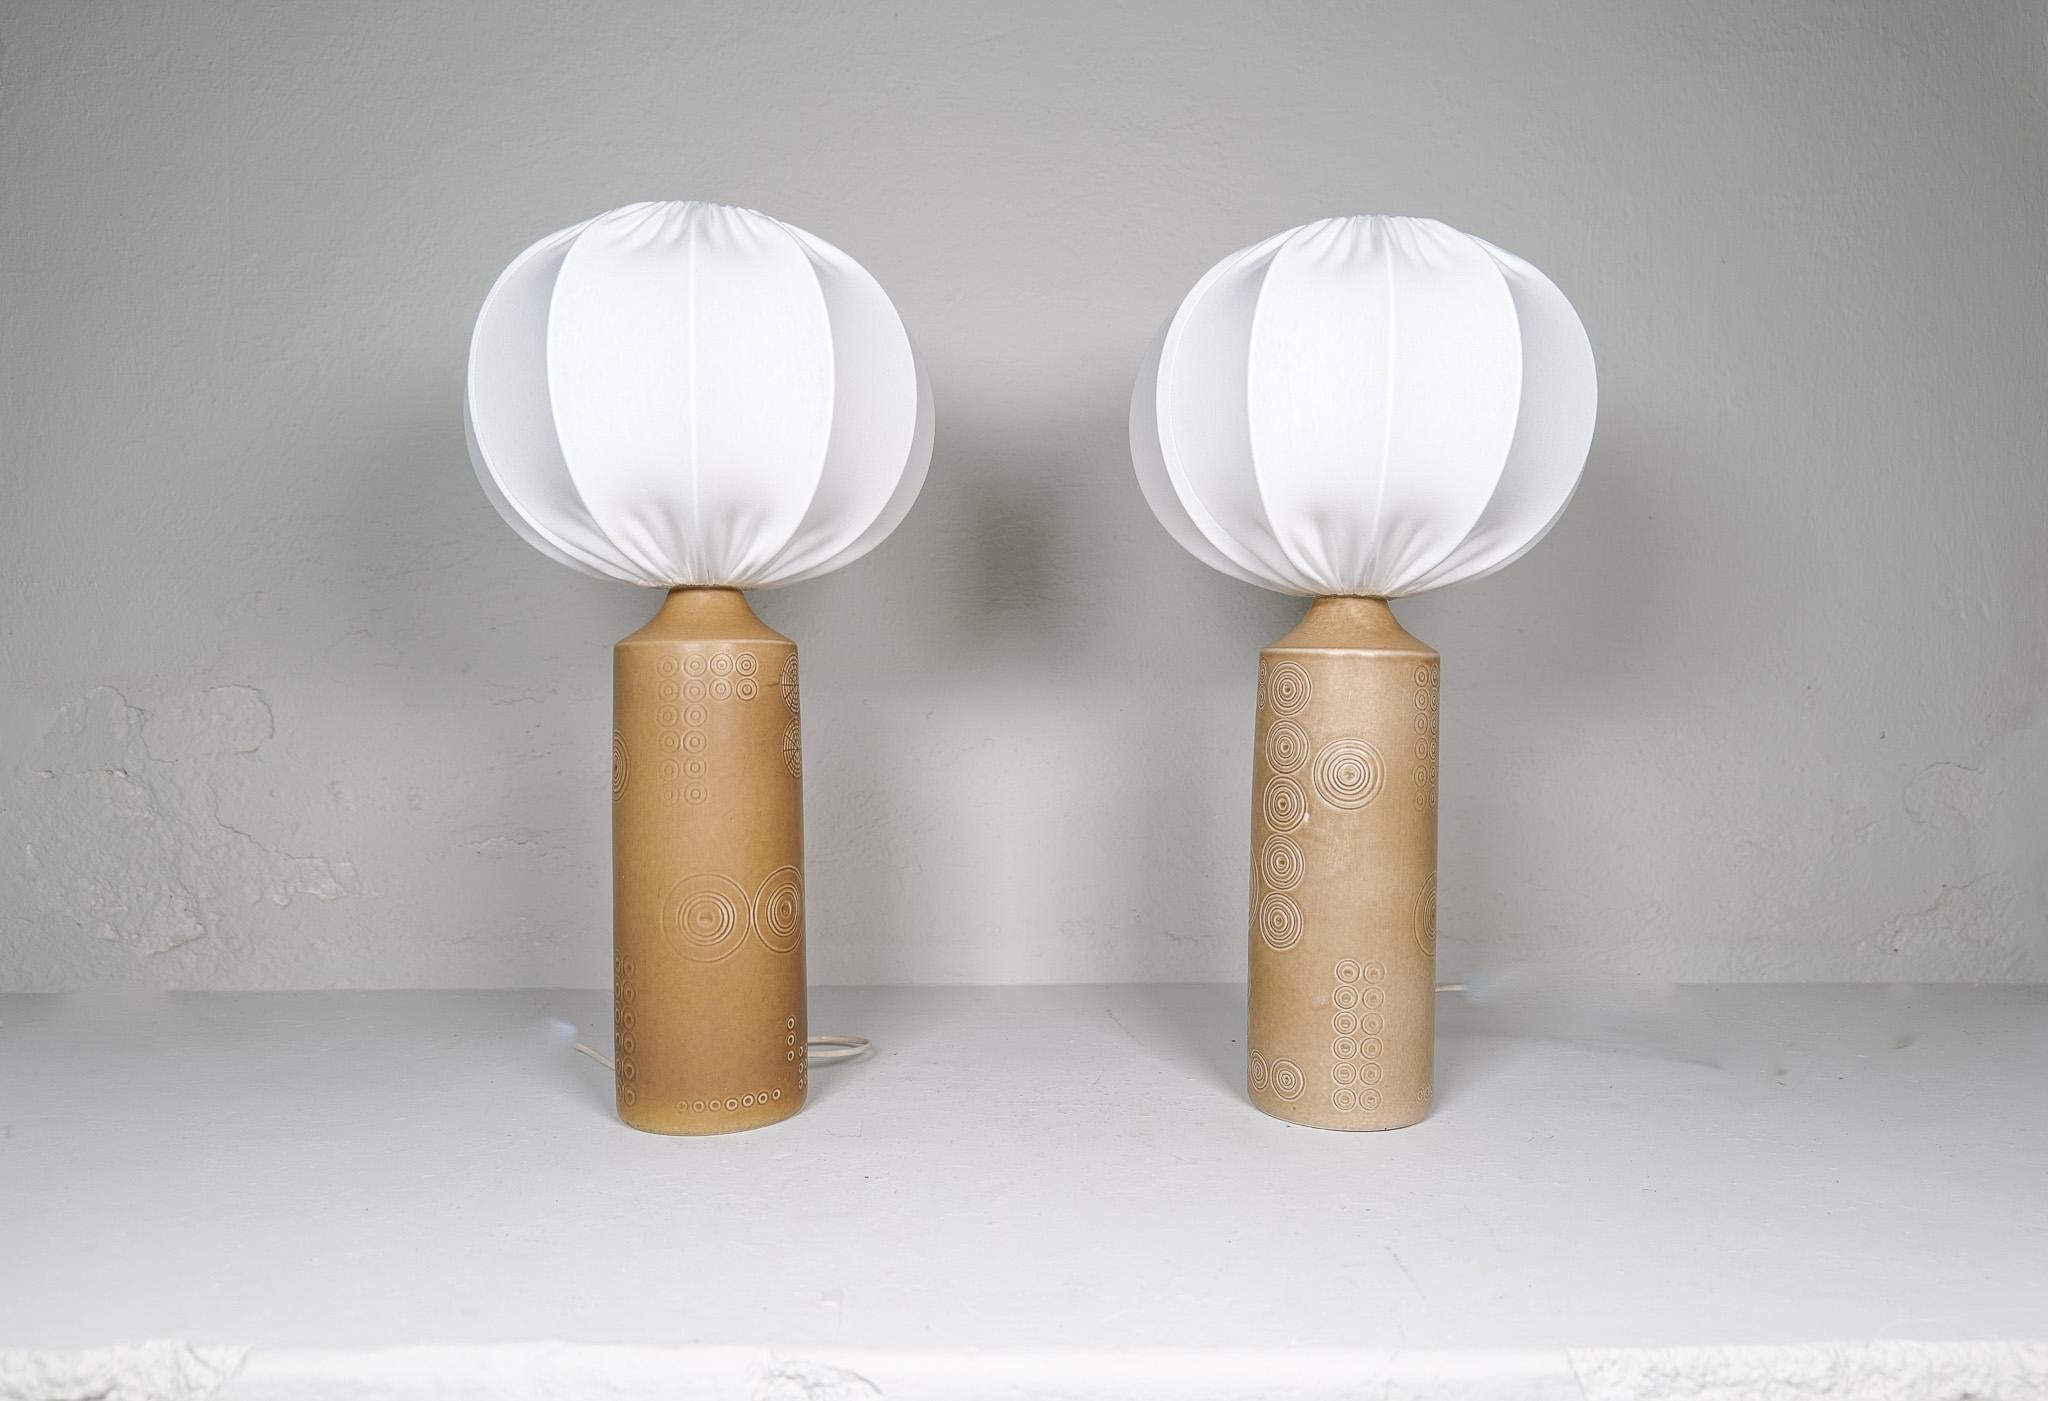 Midcentury Pair of Olle Alberius, Rorstrand Porcelain Lamps Sweden 1960s In Good Condition For Sale In Hillringsberg, SE